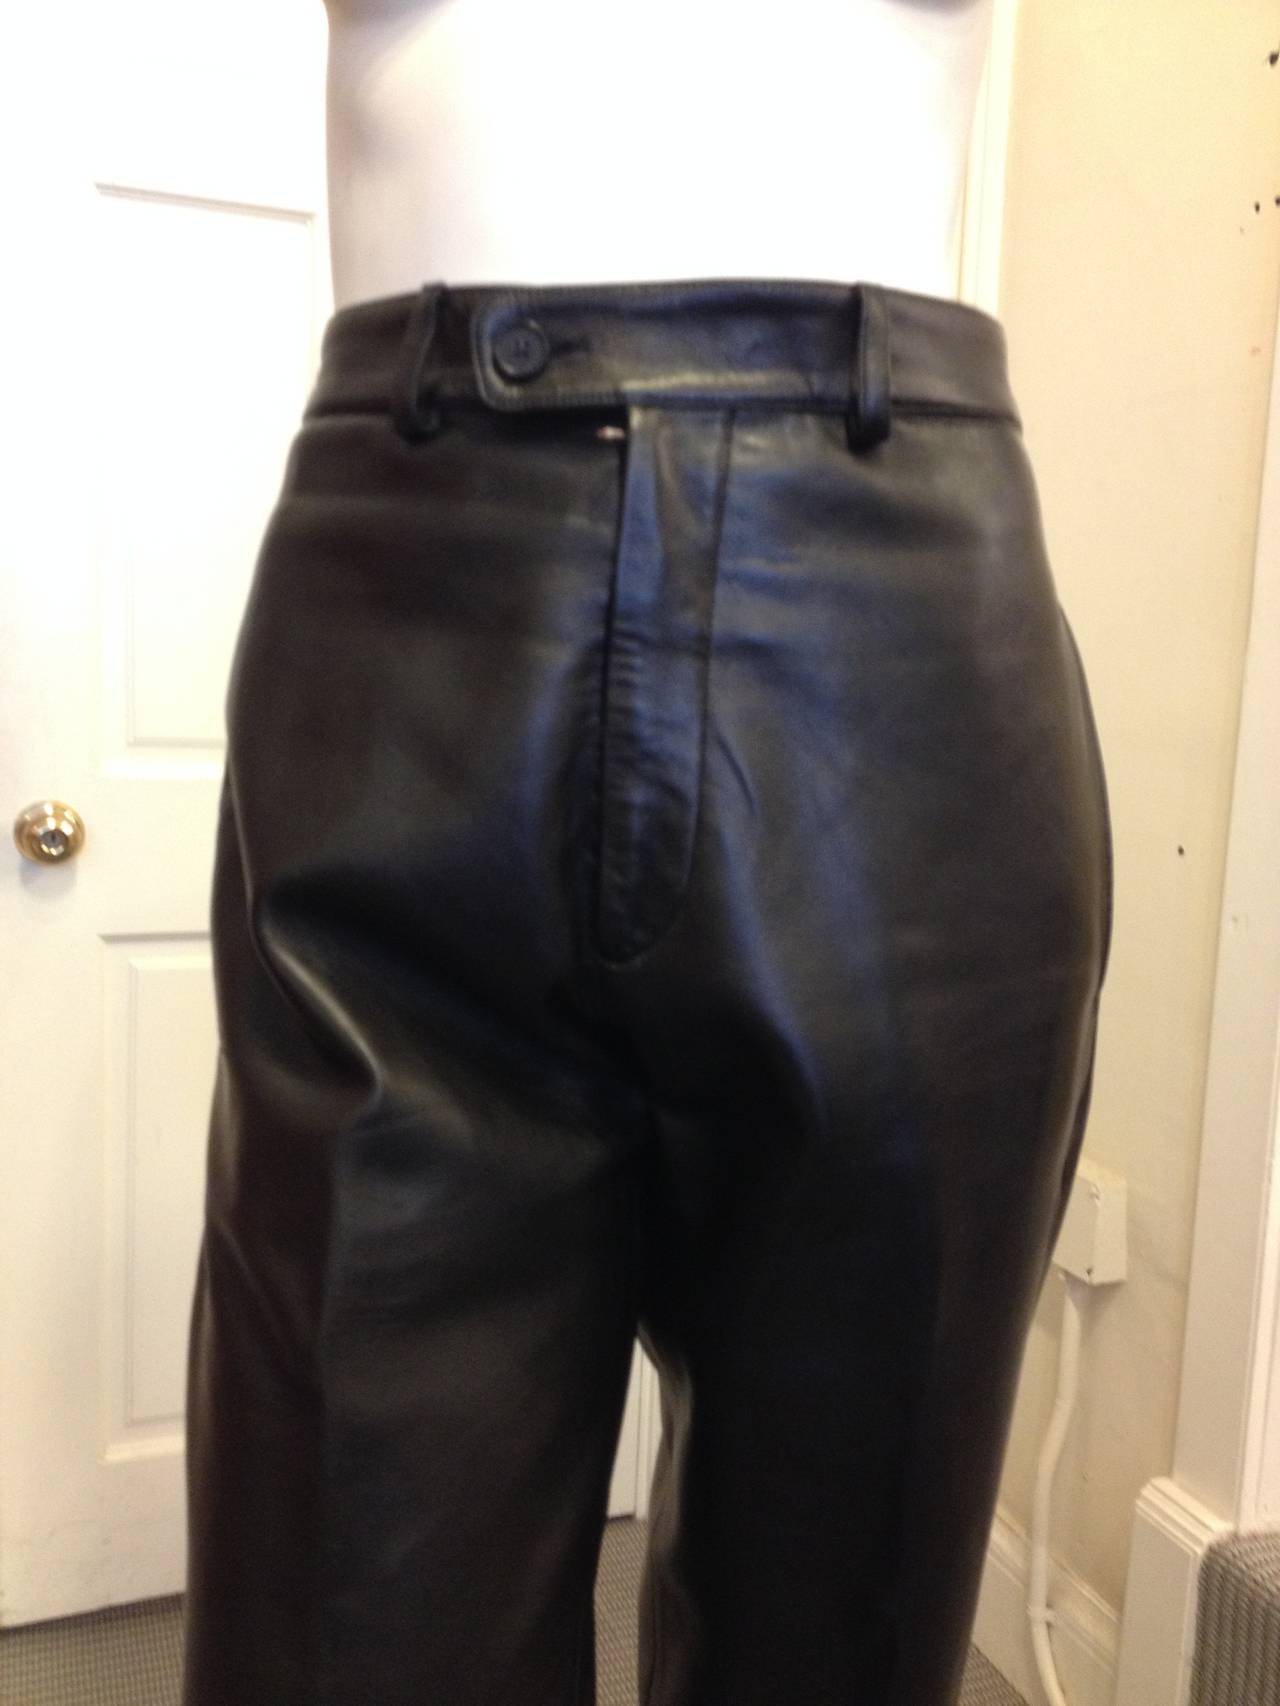 Nothing is more classic than a pair of Hermes black leather pants, nor is there a better designer for this garment. Known for impeccable construction, flawless craftsmanship, and use of especially gorgeous materials, Hermes is rooted in a history of